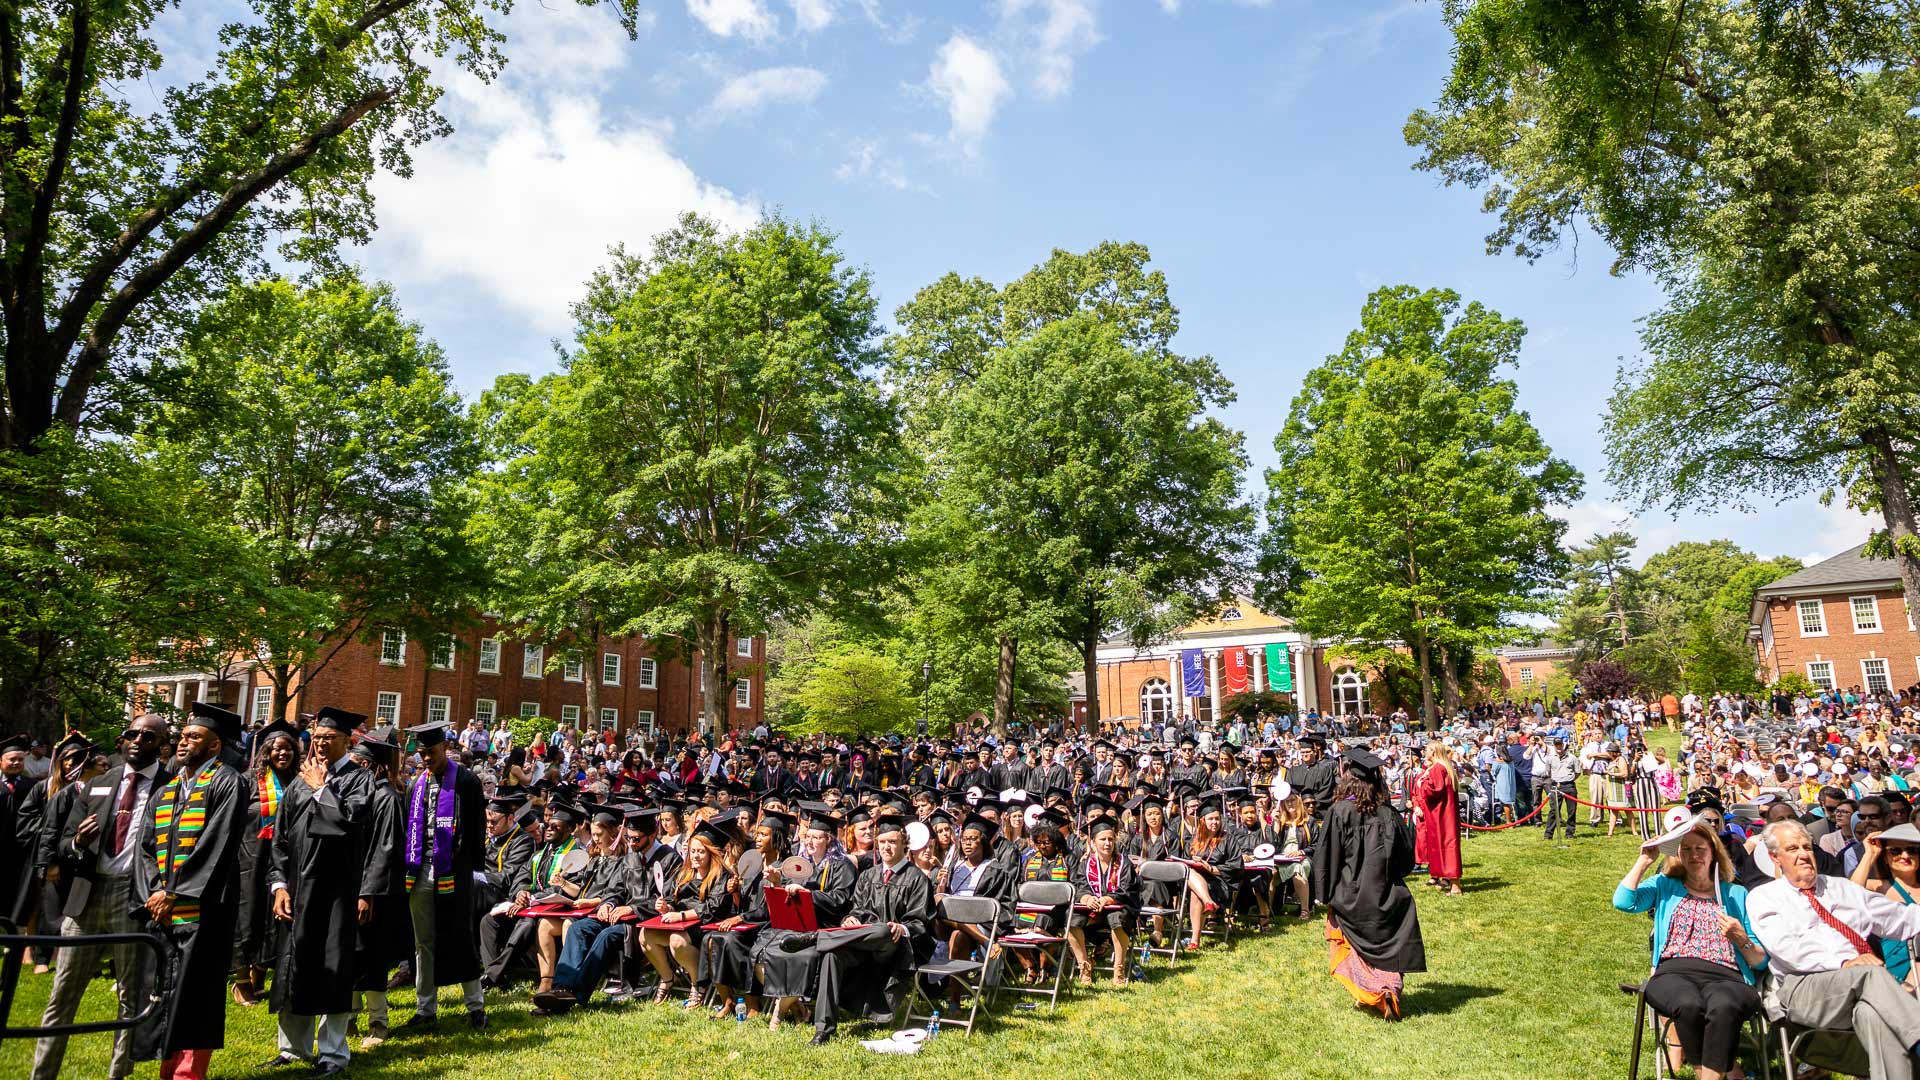 A photo of the crowd at Commencement.